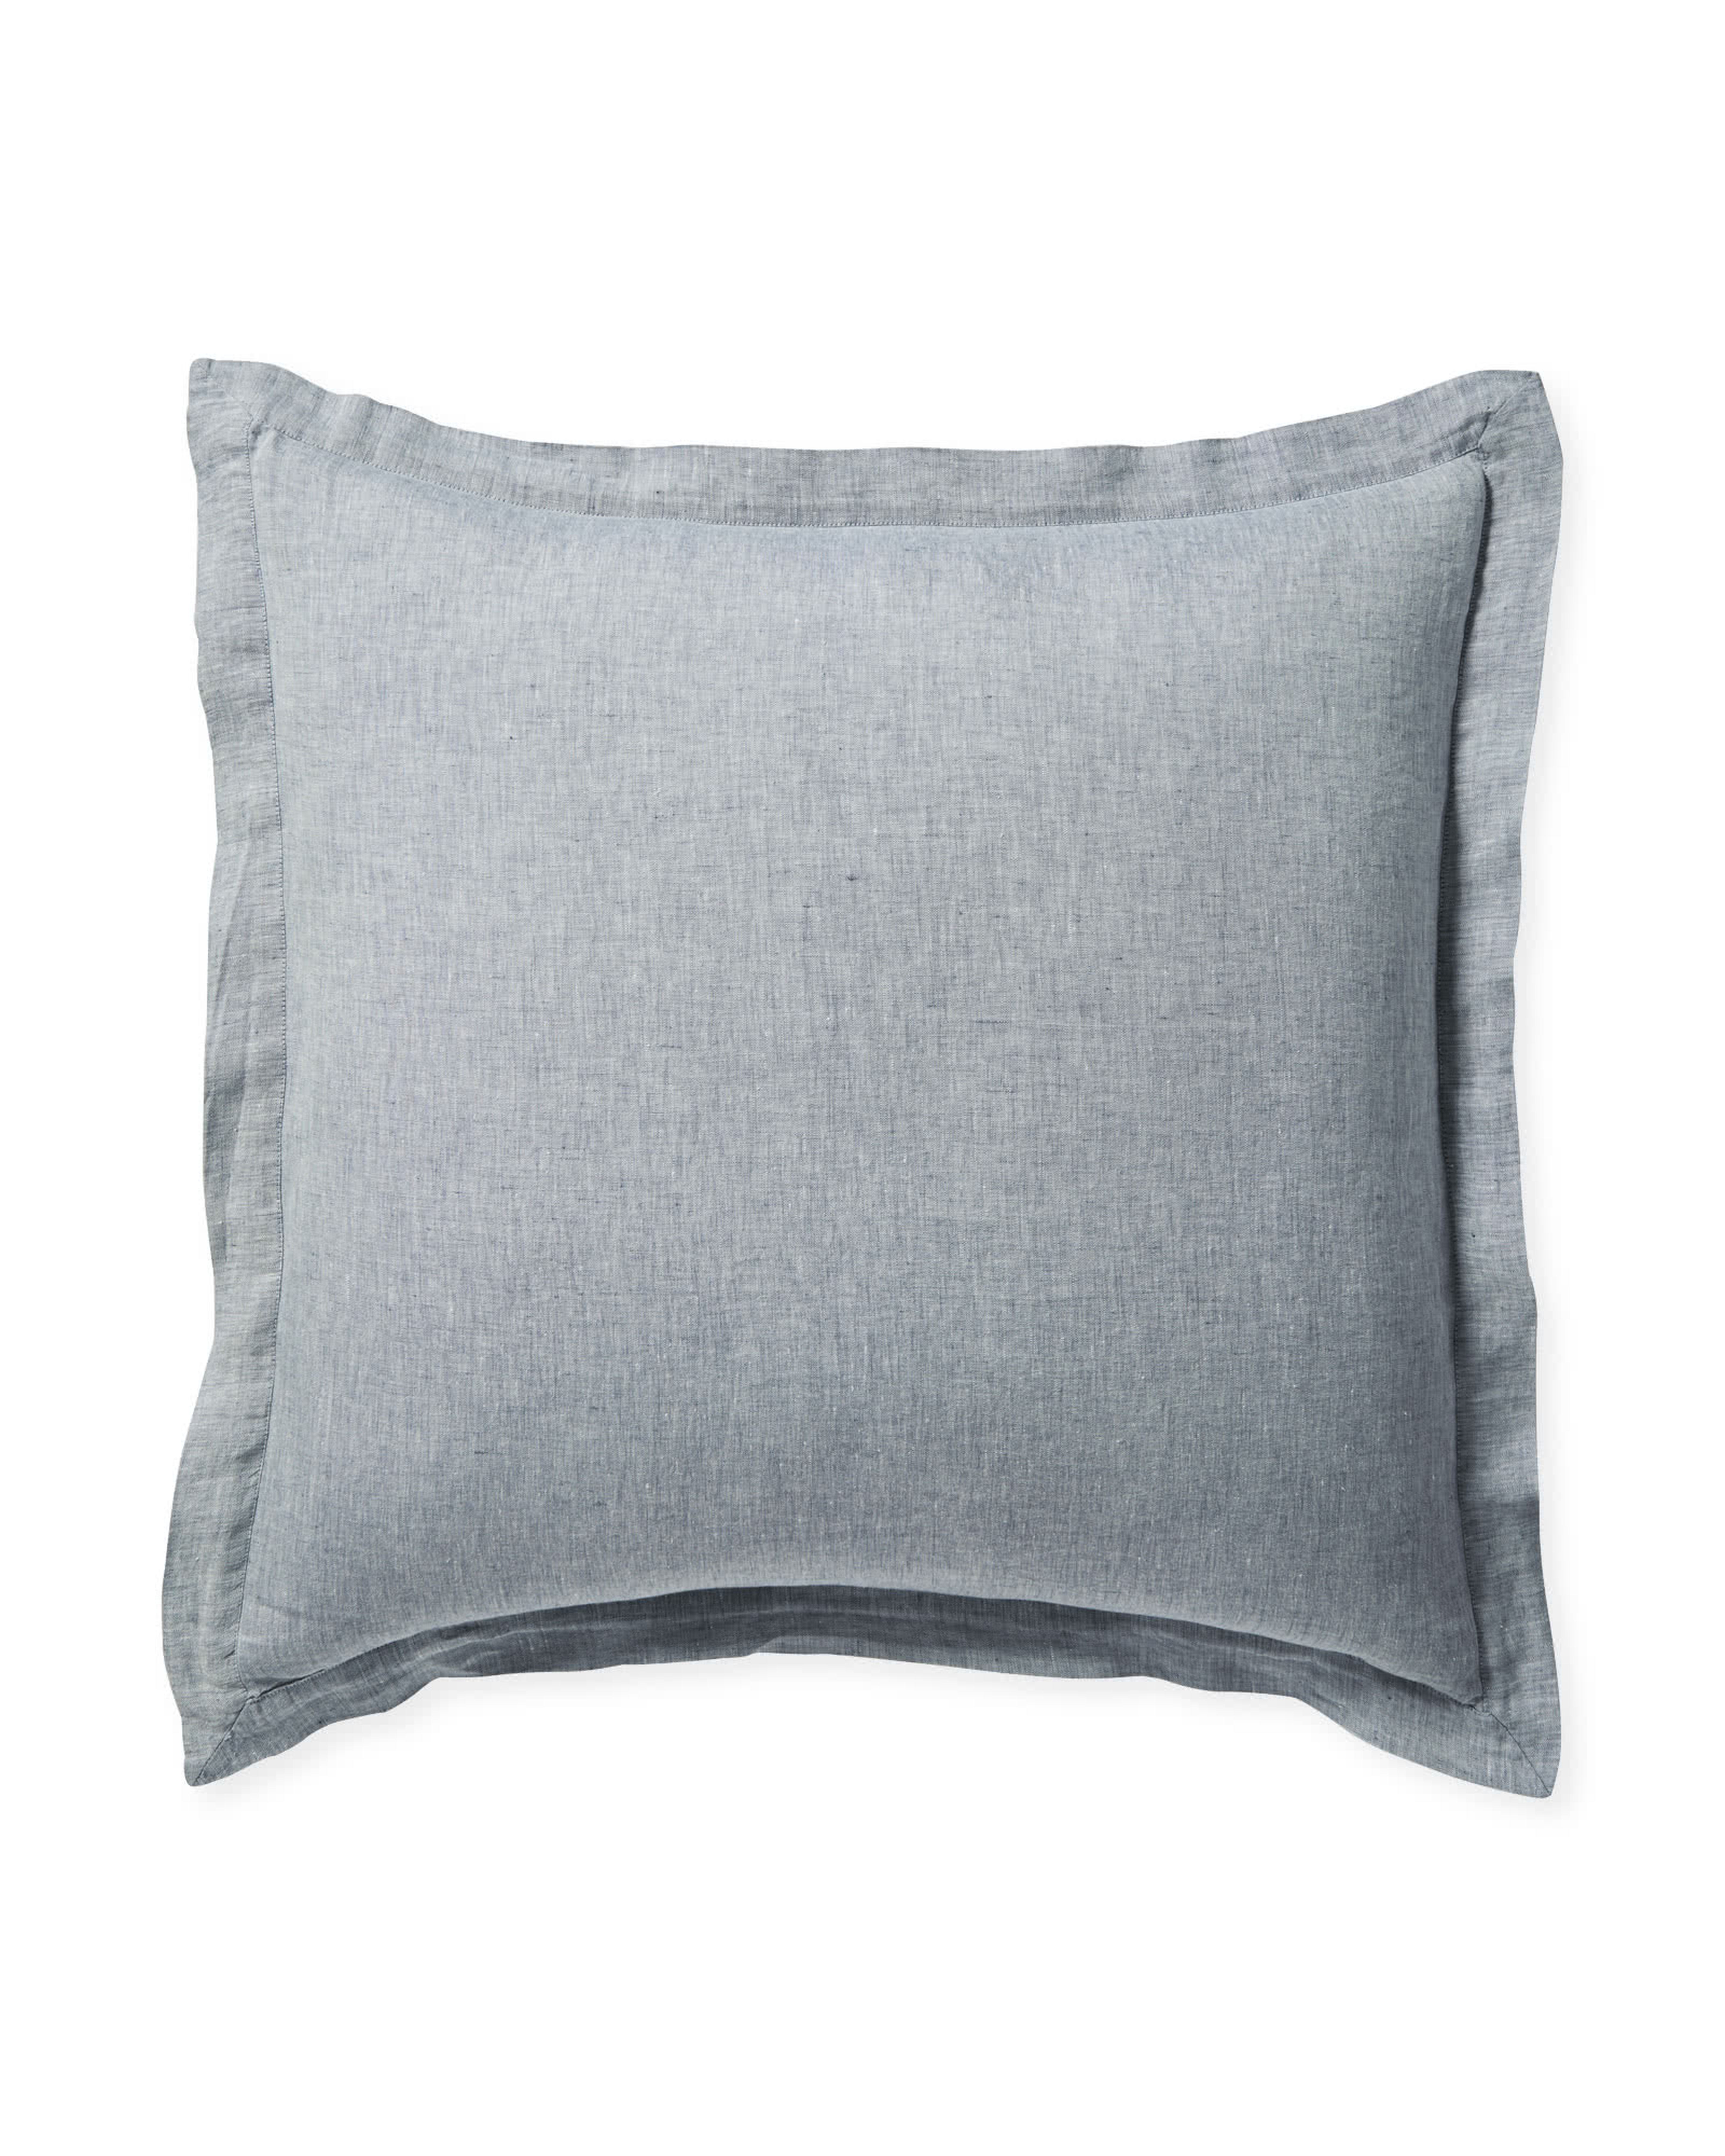 Cavallo Linen Euro Sham - Heathered Navy - Insert sold separately - Serena and Lily